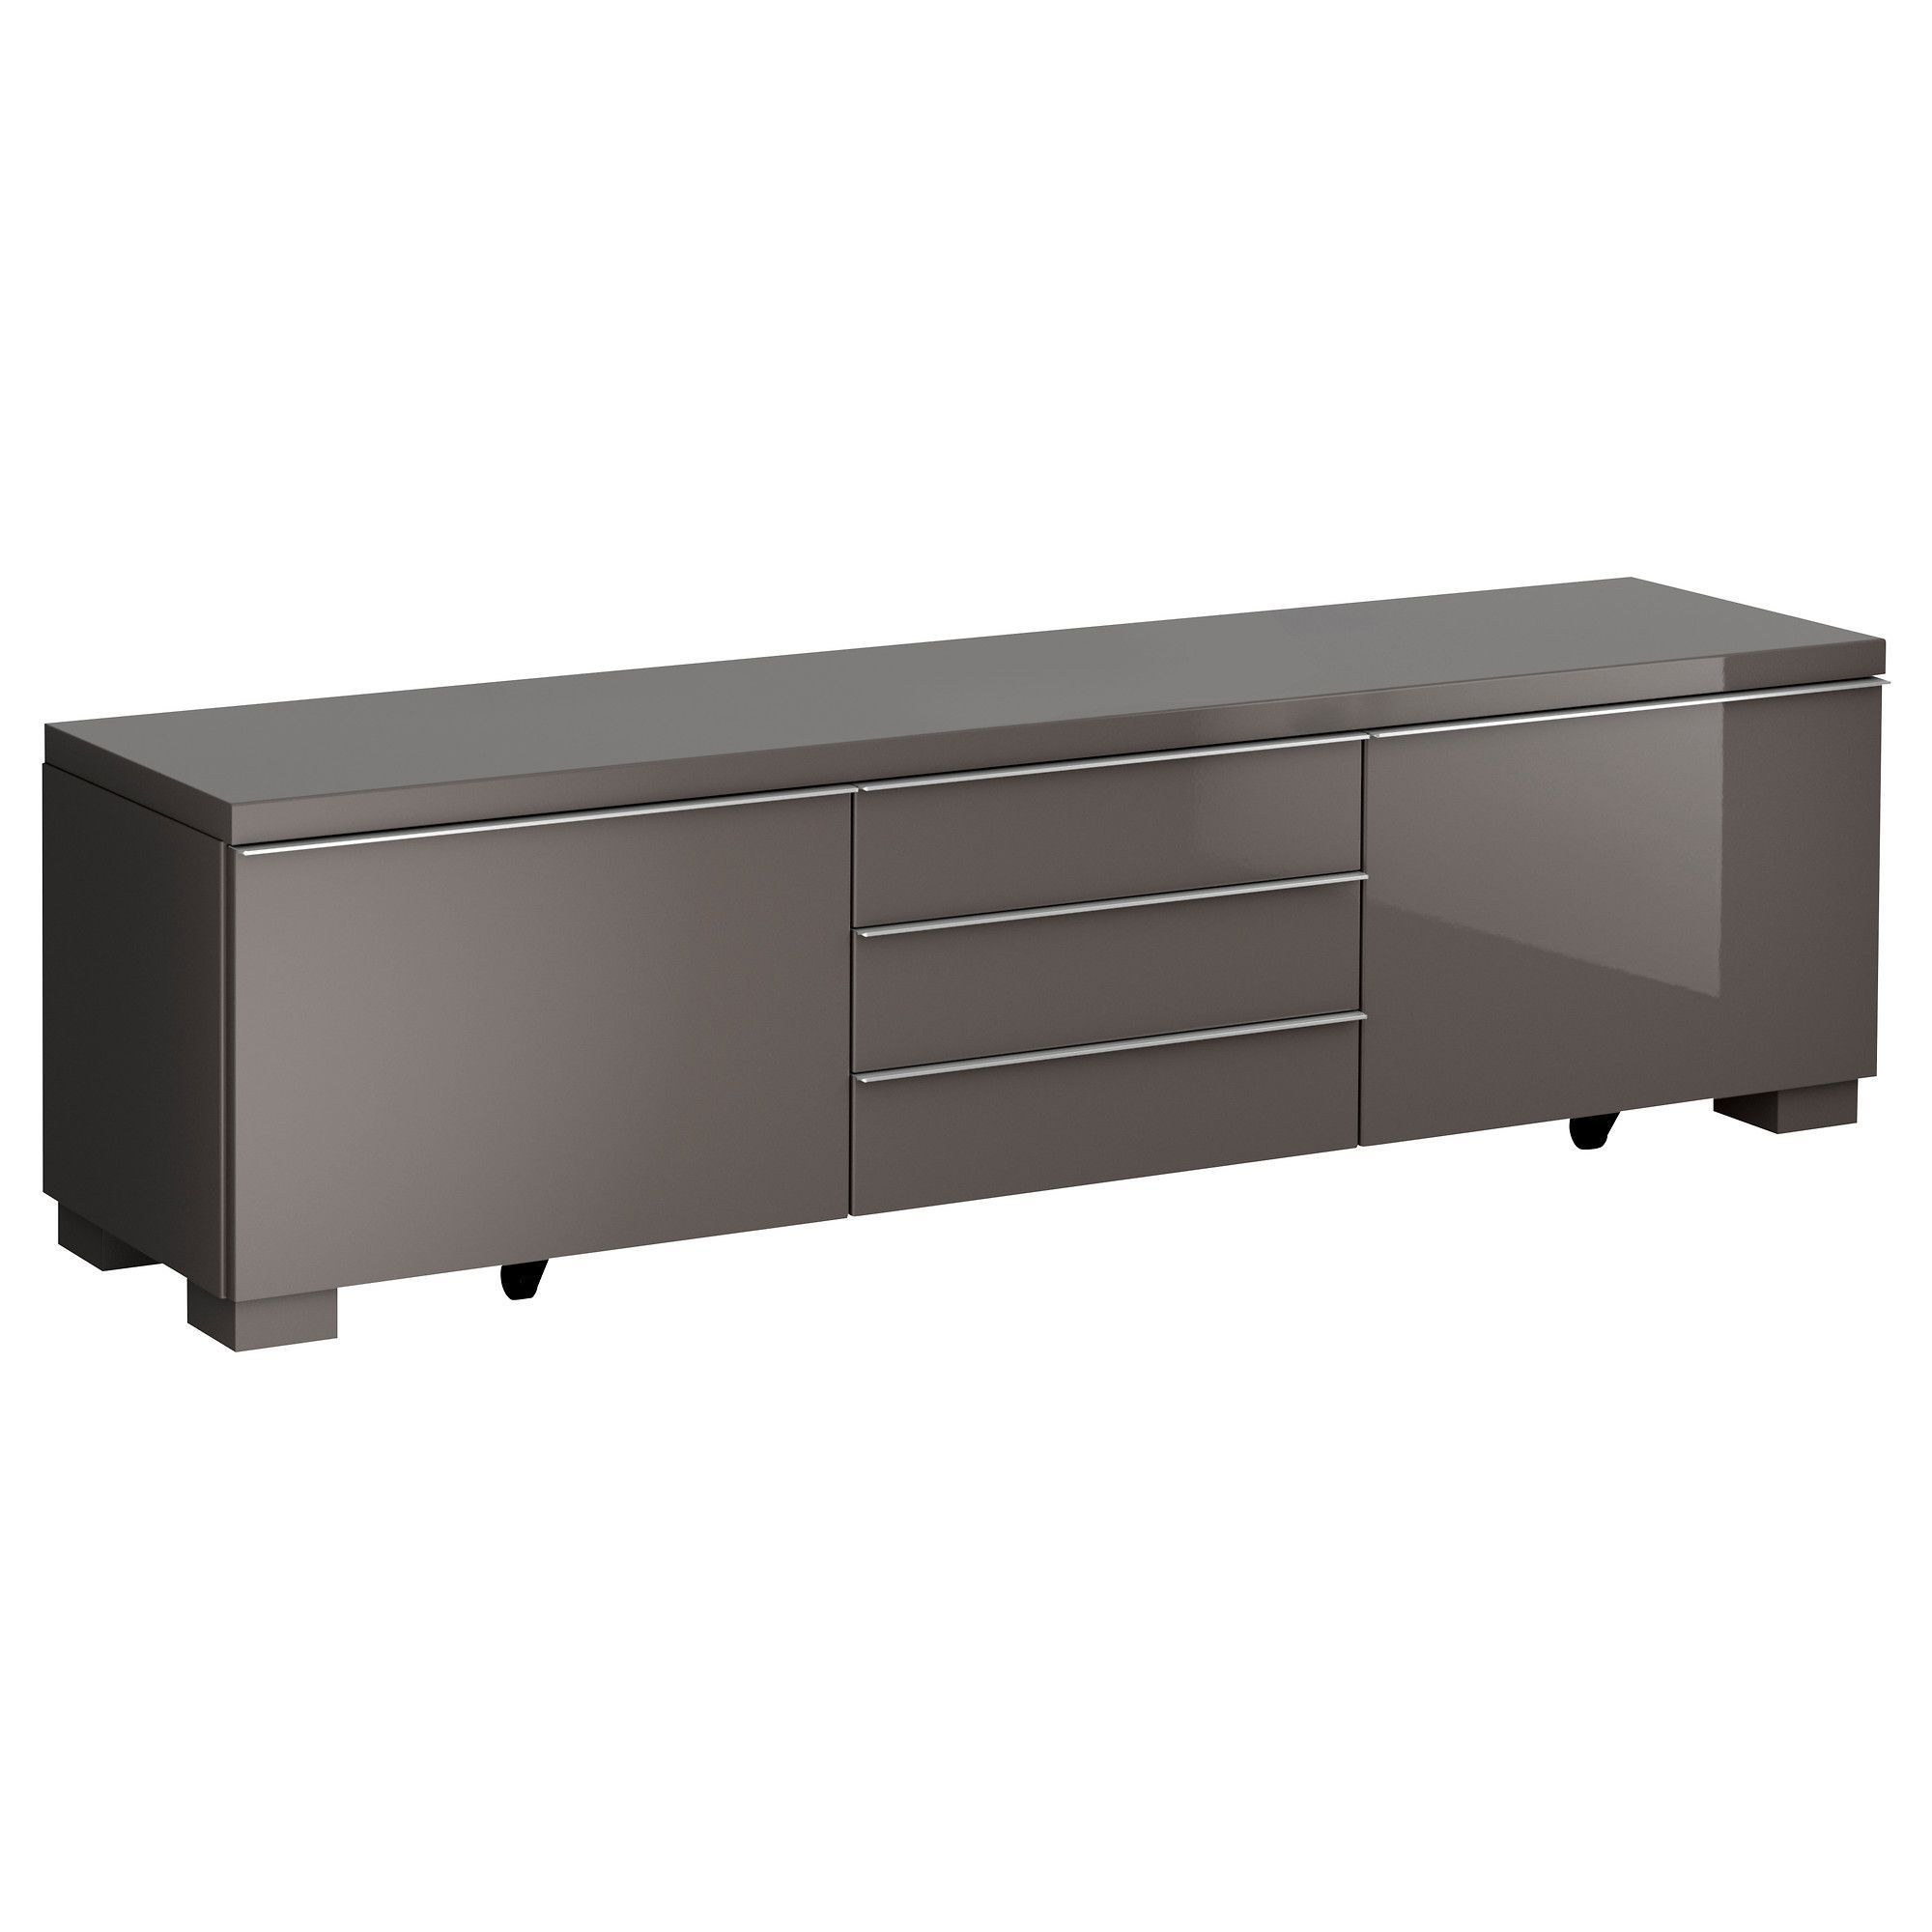 High Gloss Tv Benches Intended For Current $249 Bestå Burs Tv Unit – High Gloss Gray – Ikea Dimensions: 70  (View 9 of 20)